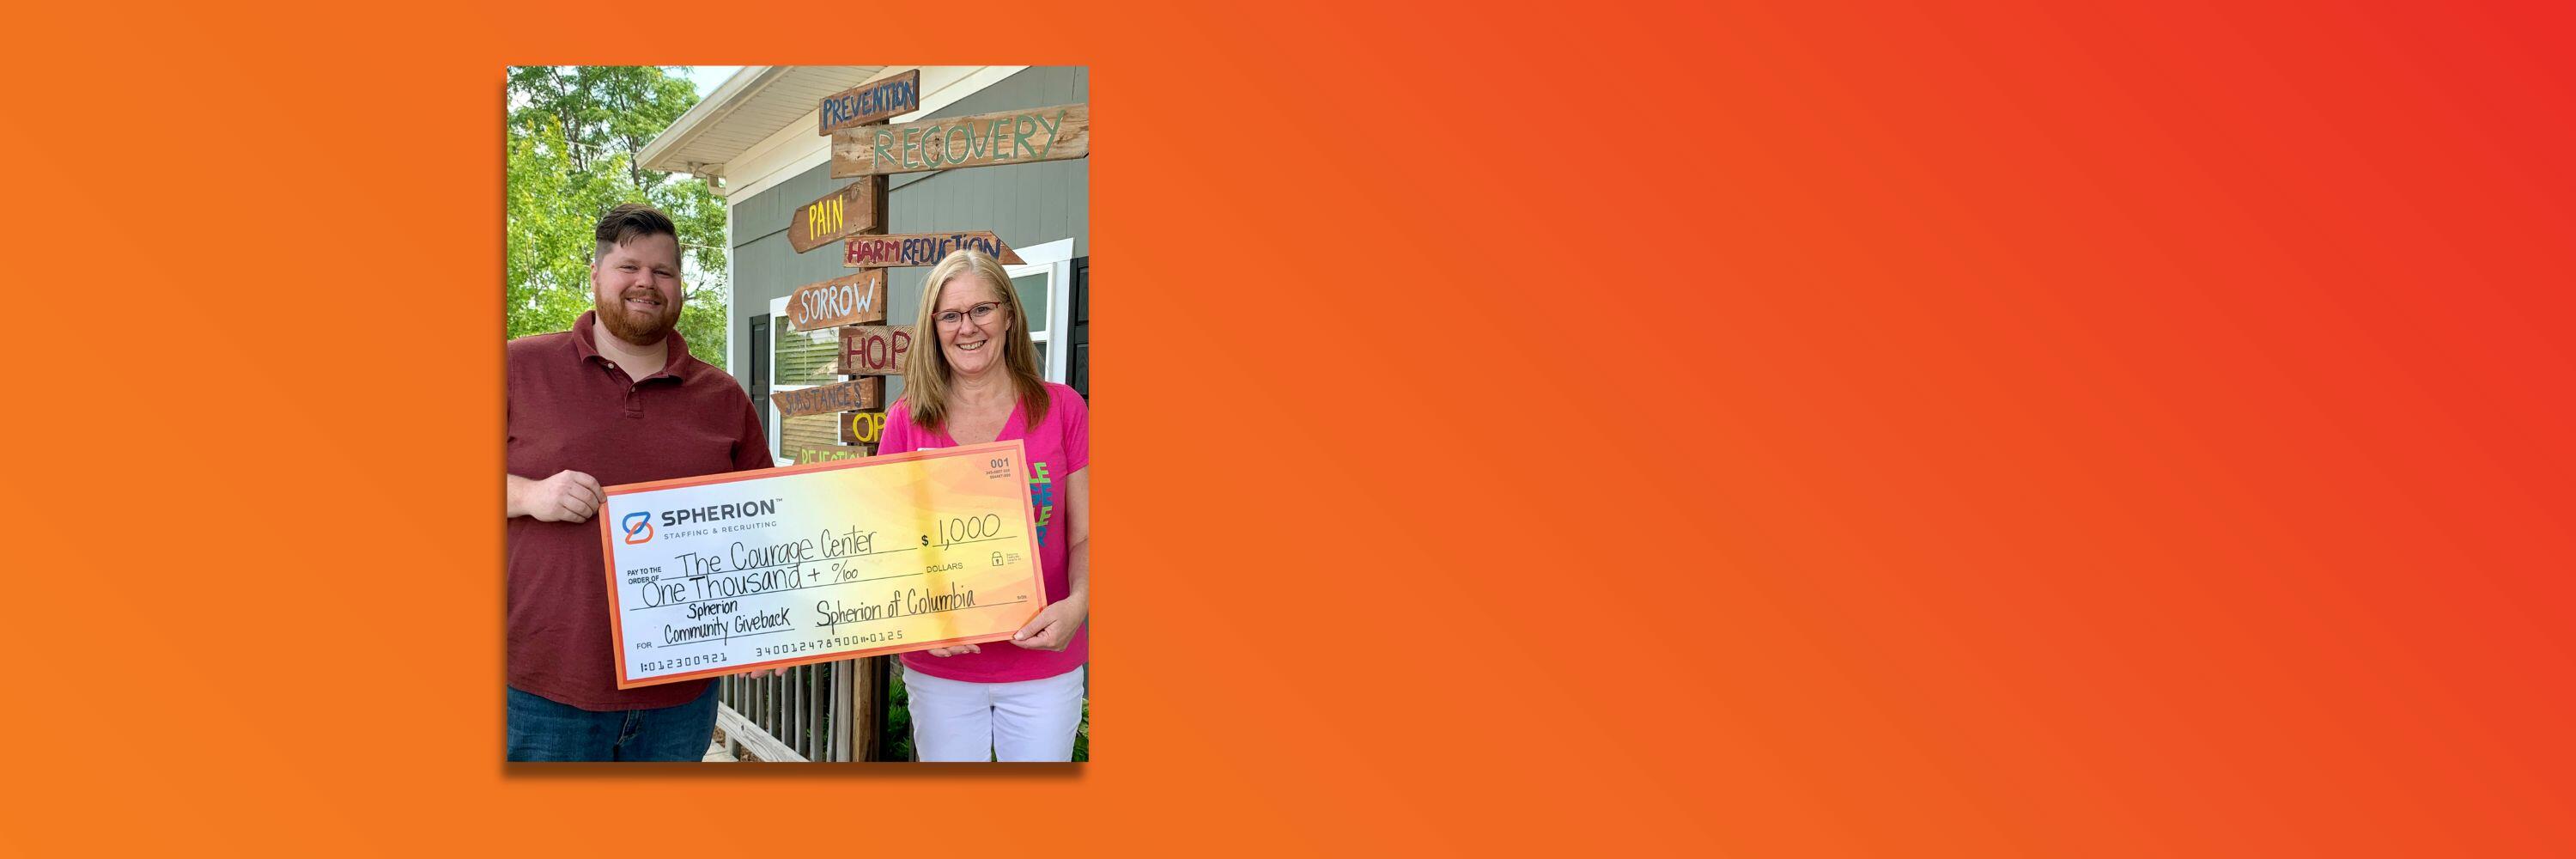 Orange background with a photo of a man and woman smiling and holding a giant check